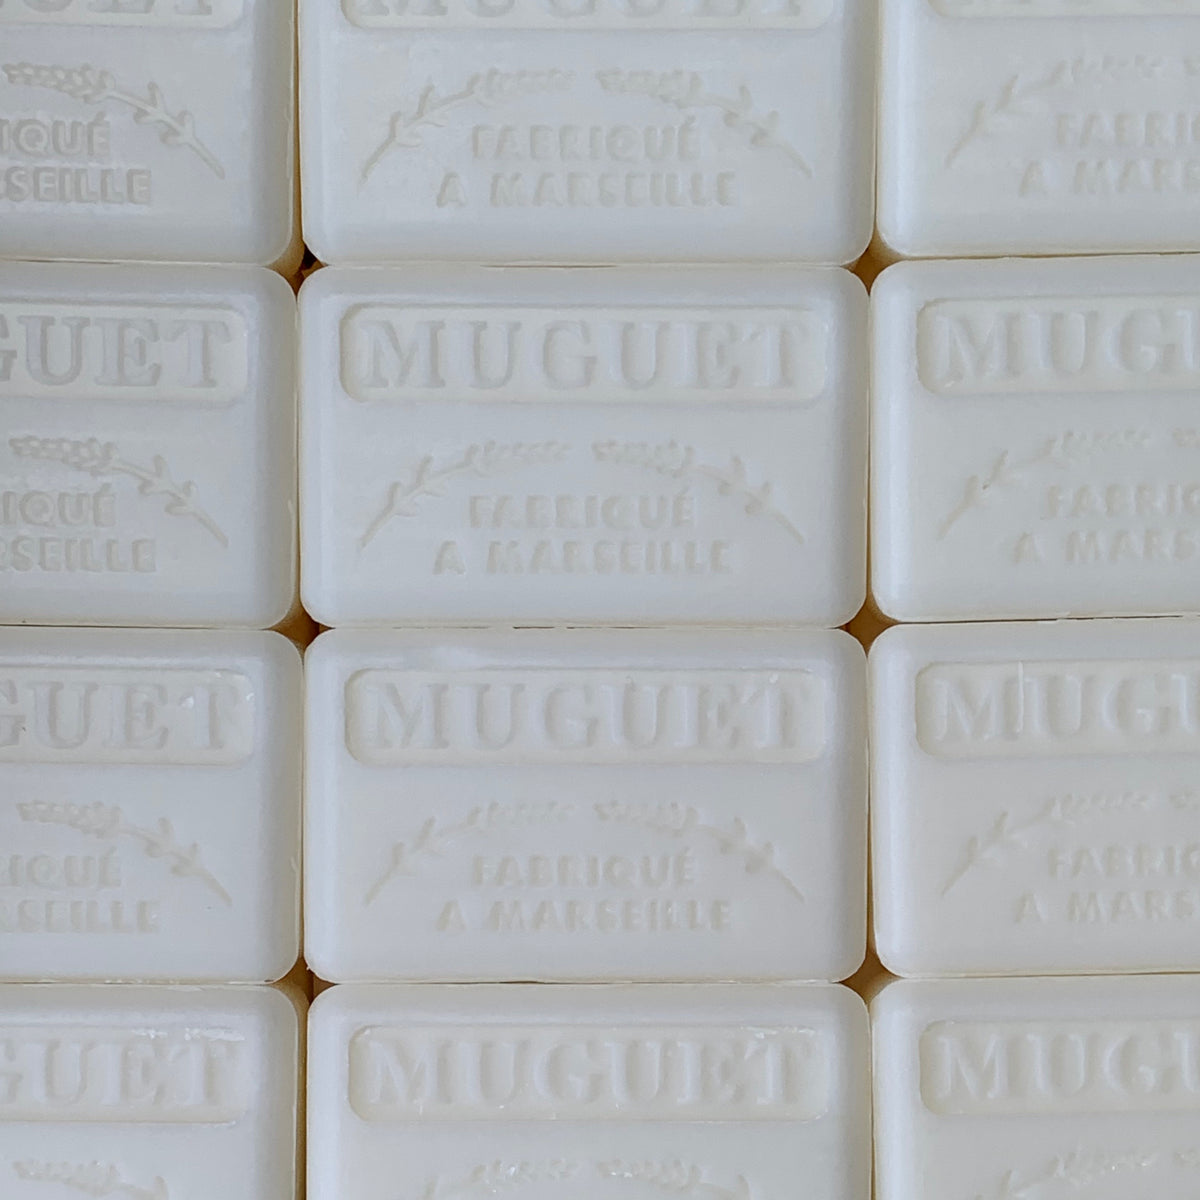 Muguet / Lily of the Valley French Soap Bar 125gl